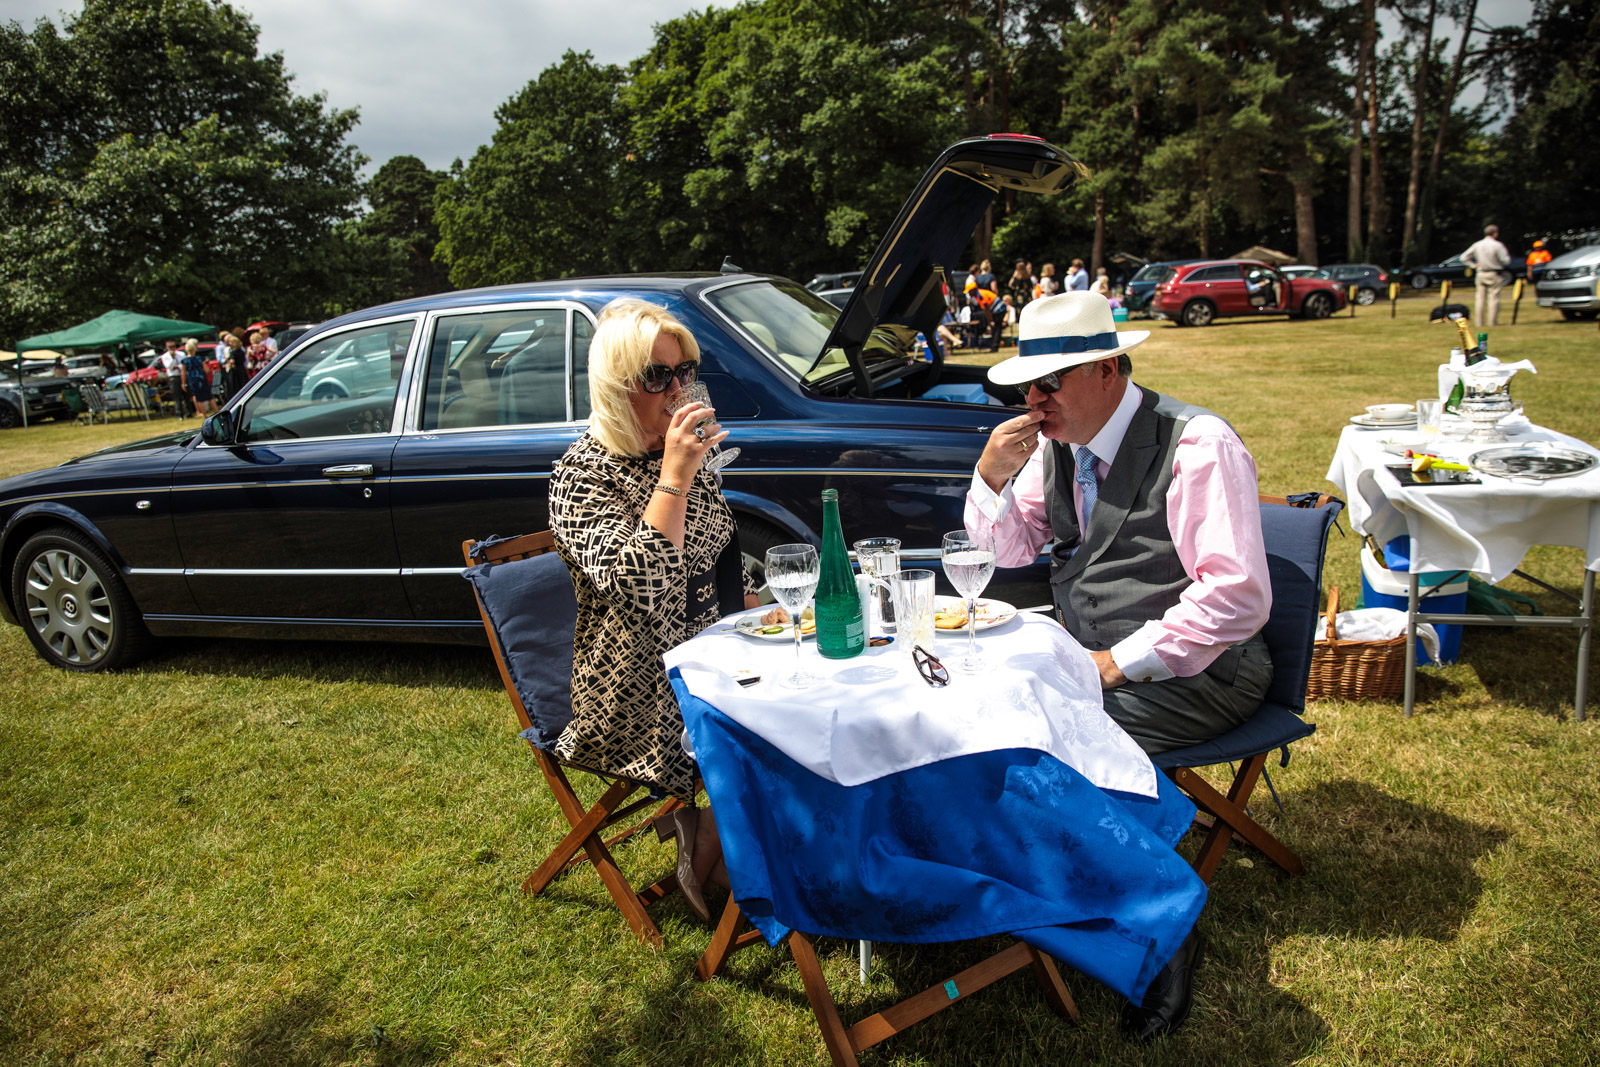  Racegoers eat and drink by their Bentley in a car park on day 3 of Royal Ascot on June 22, 2017 in Ascot. 